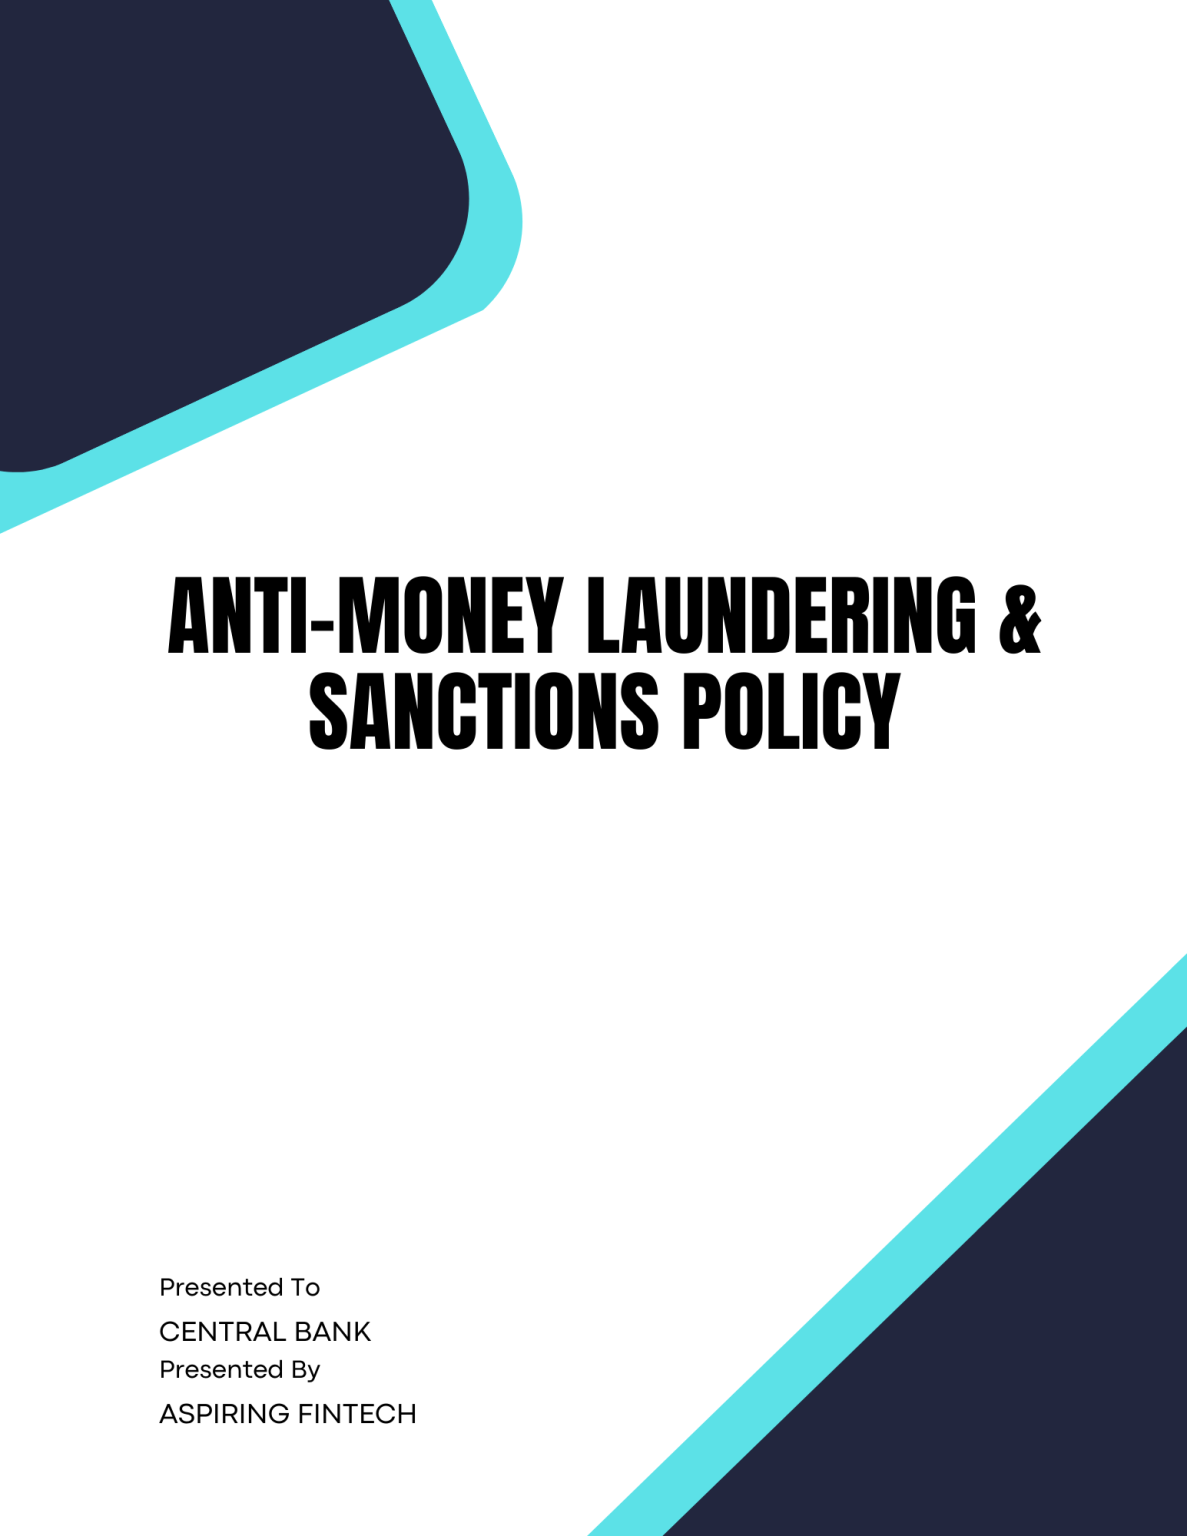 Anti-Money Laundering & Sanctions Policy